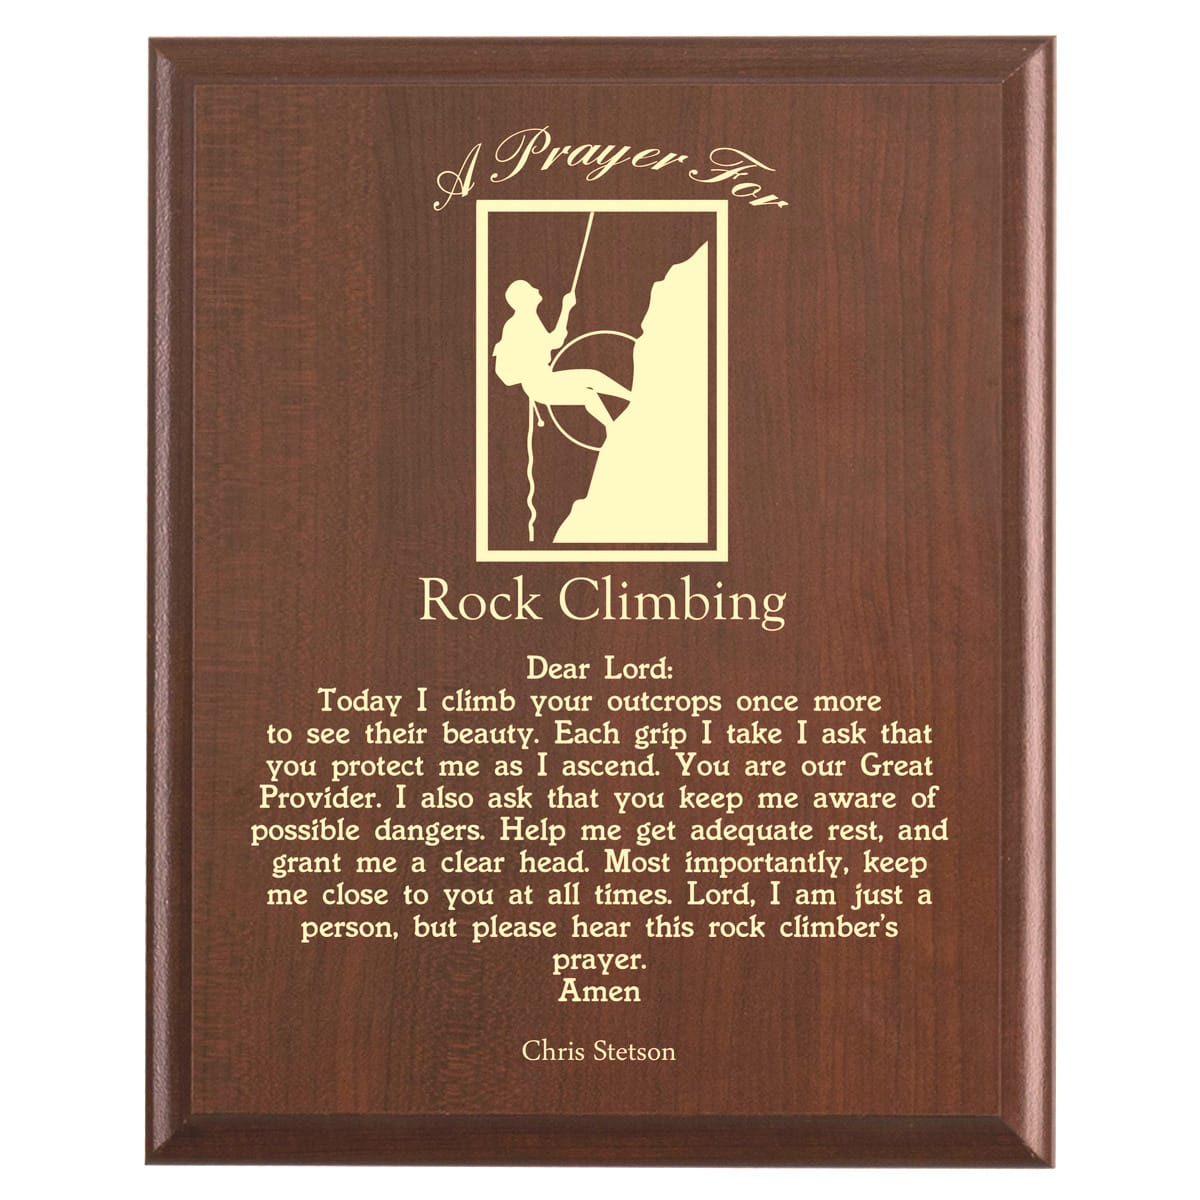 Plaque photo: Rock Climbing Prayer Plaque design with free personalization. Wood style finish with customized text.